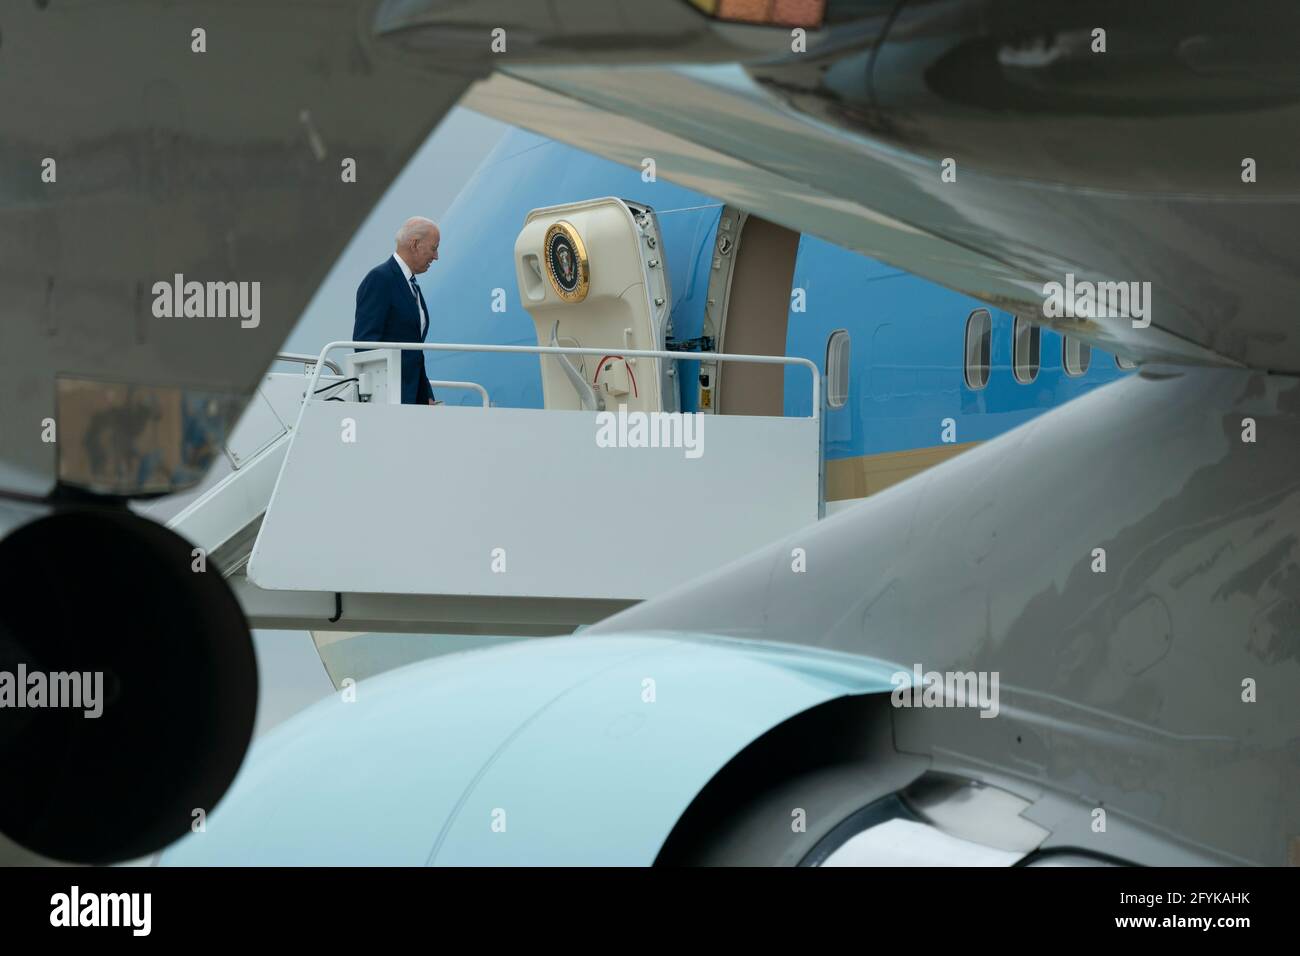 United States President Joe Biden boards Air Force One at Joint Base Andrews, to make remarks at Joint Base Langley-Eustis in Virginia, Friday, May 28, 2021. Credit: Chris Kleponis/Pool via CNP /MediaPunch Stock Photo